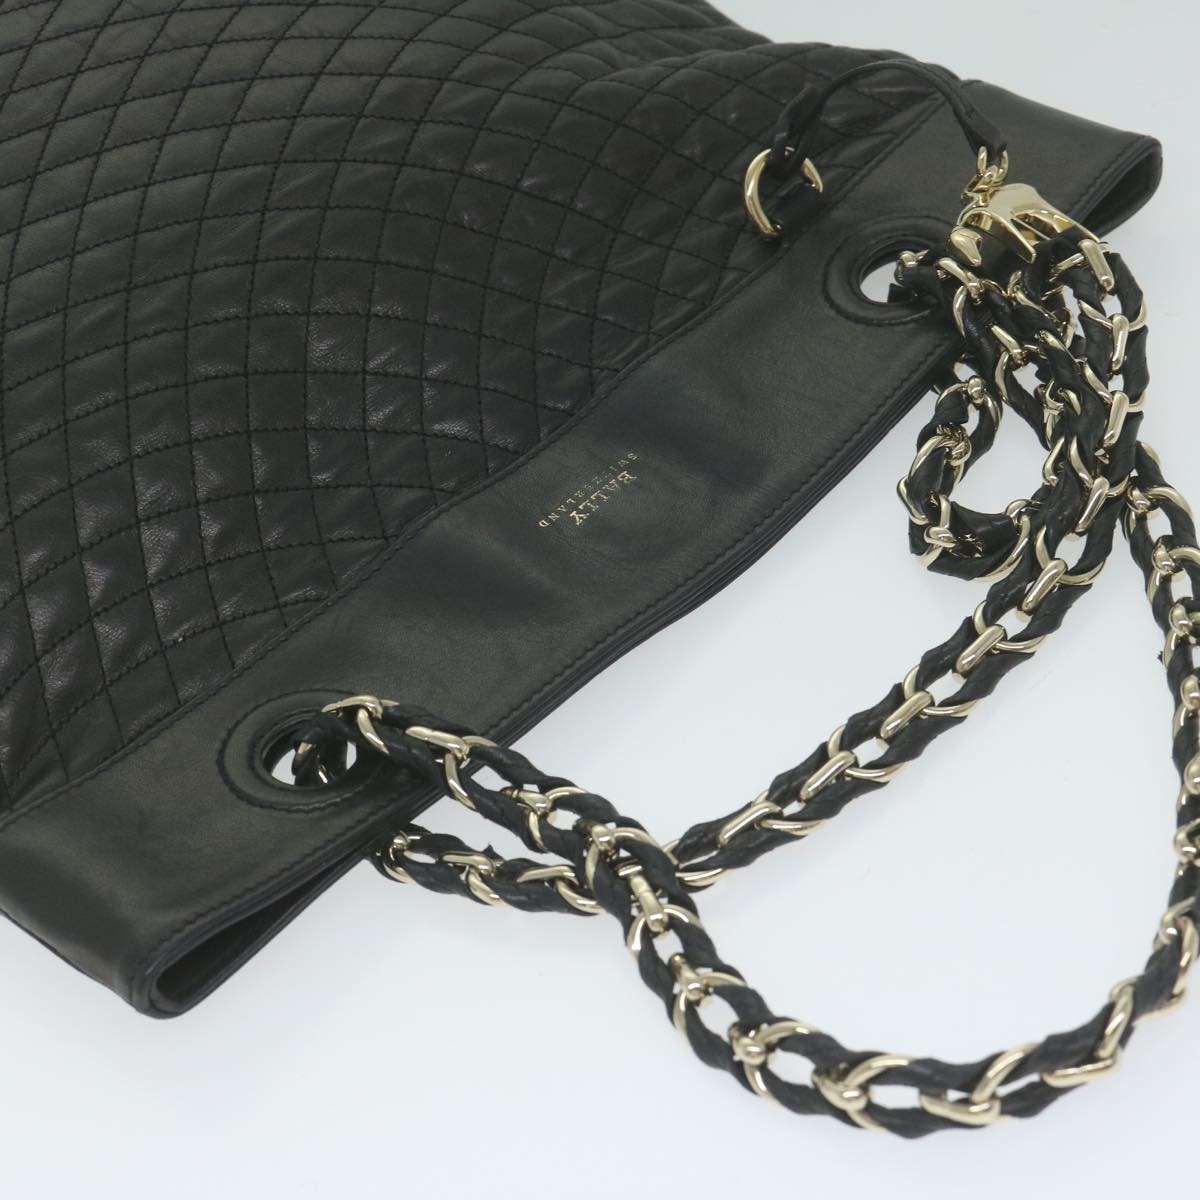 BALLY Quilted Chain Shoulder Bag Leather Black Auth ac2555